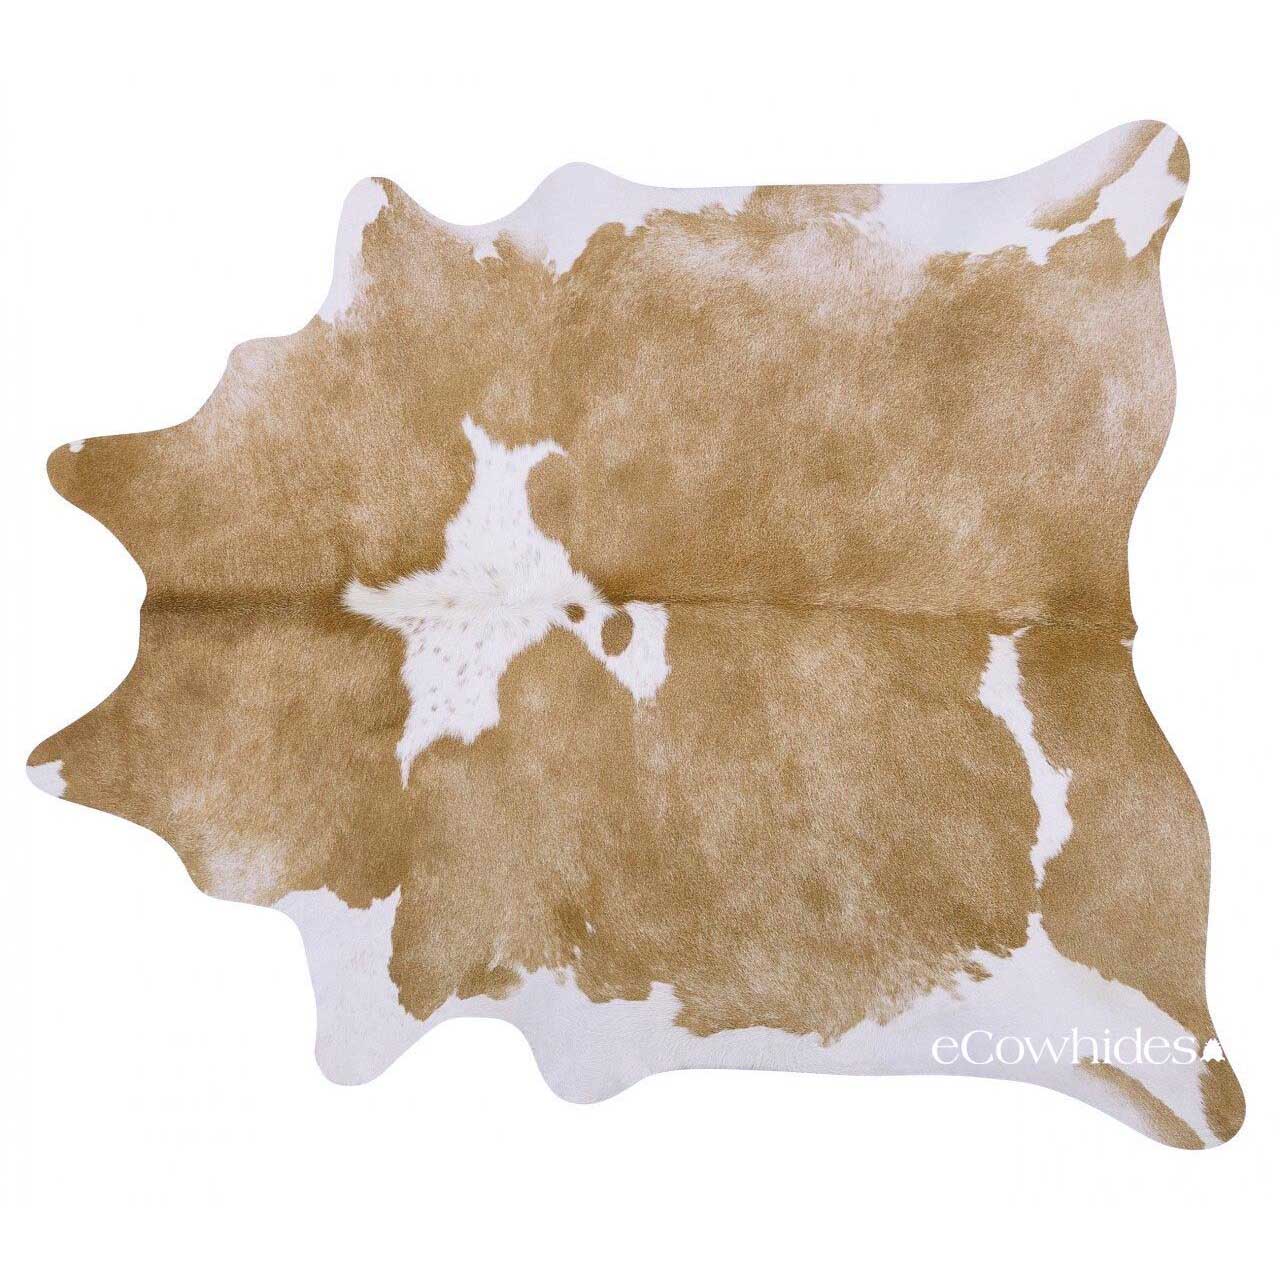 BRAZILIAN RANCHER COWHIDES – SK Equine Products